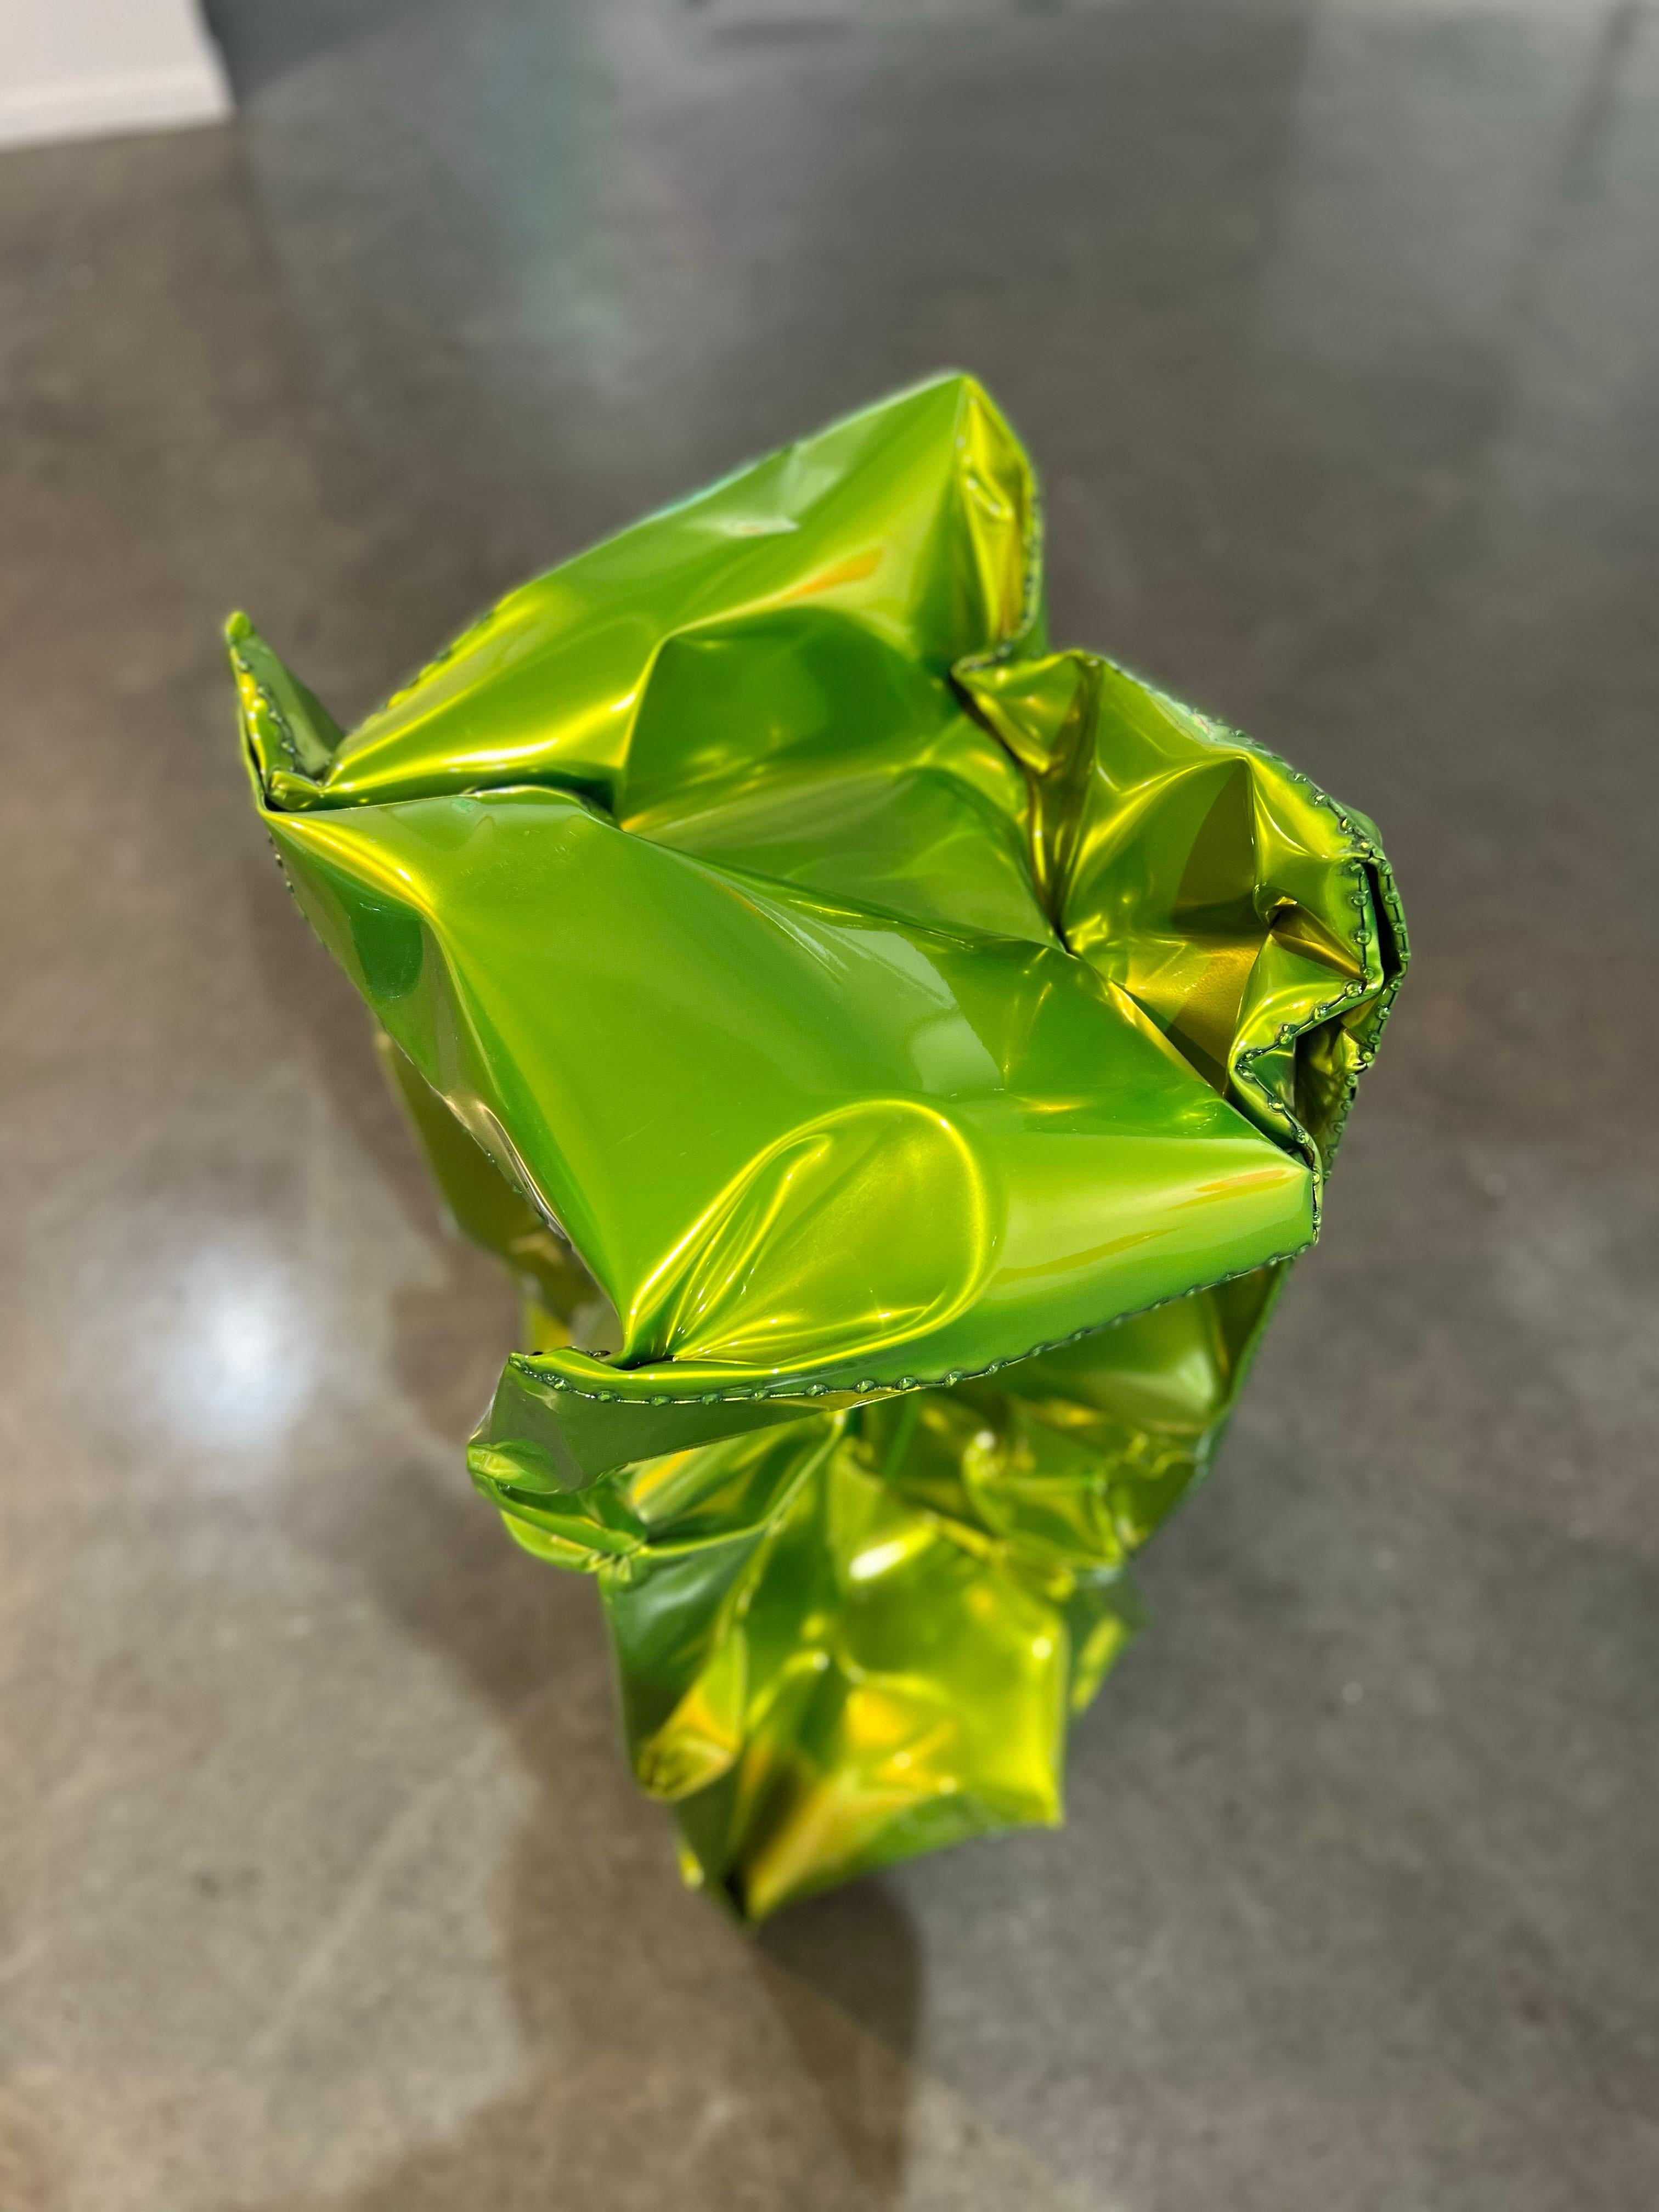 An outdoor sculpture made out of powder coated stainless steel. This sculpture is a rich, vibrant, and shiny lime green. 

Rick Lazes is a three dimensional artist who works in a variety of media including wood, plaster, stainless steel, glass,